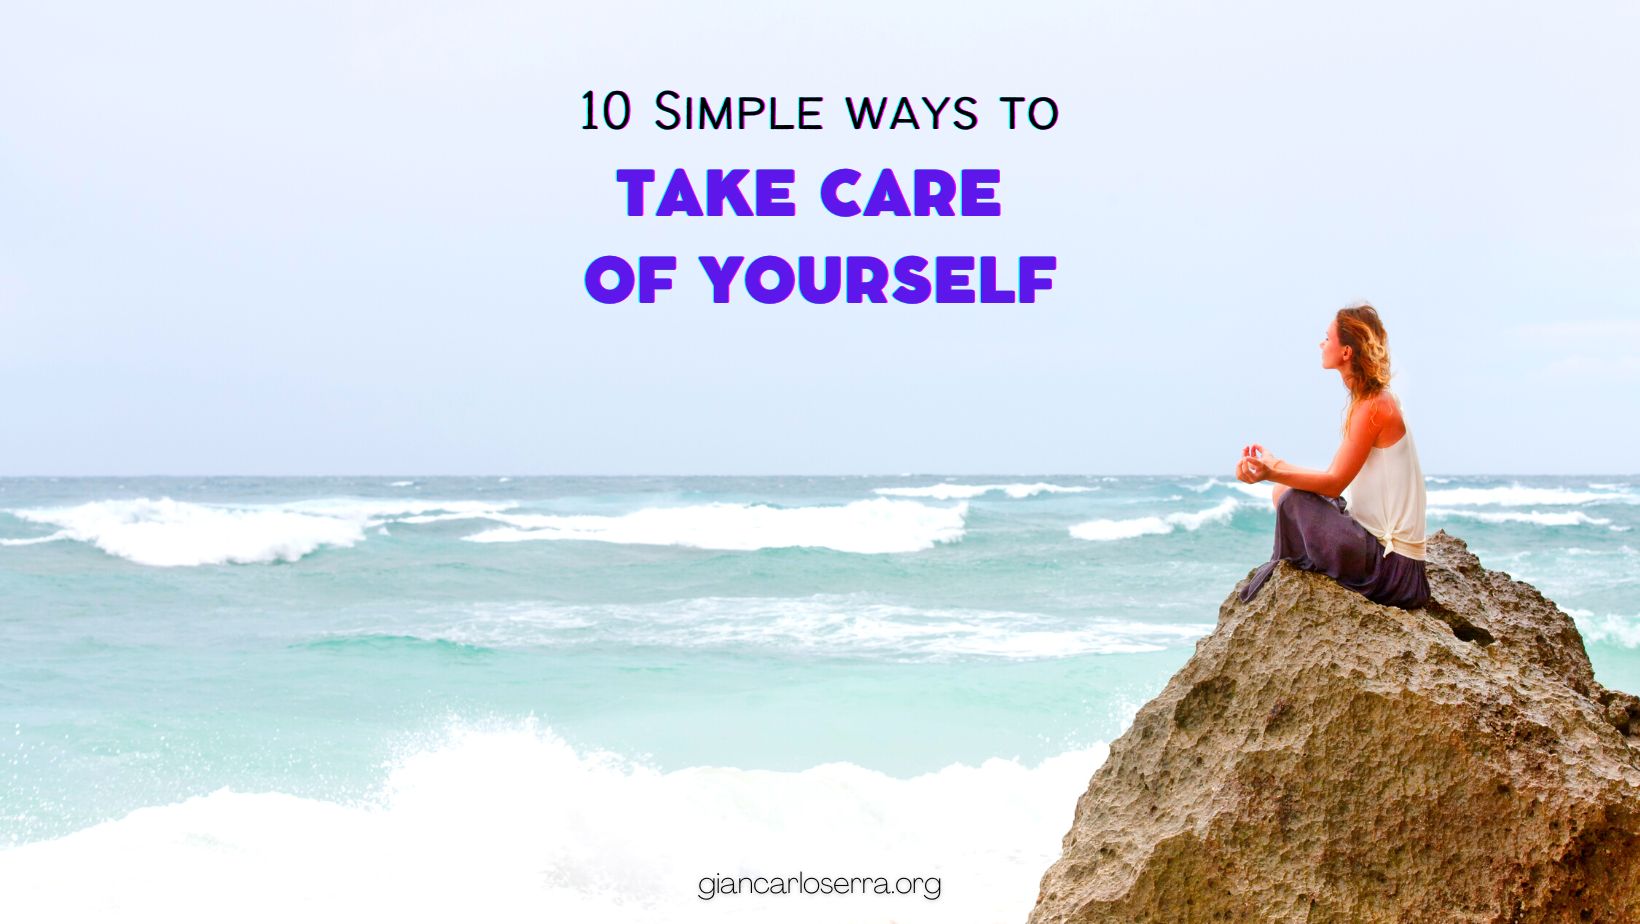 10 simple ways to take care of yourself